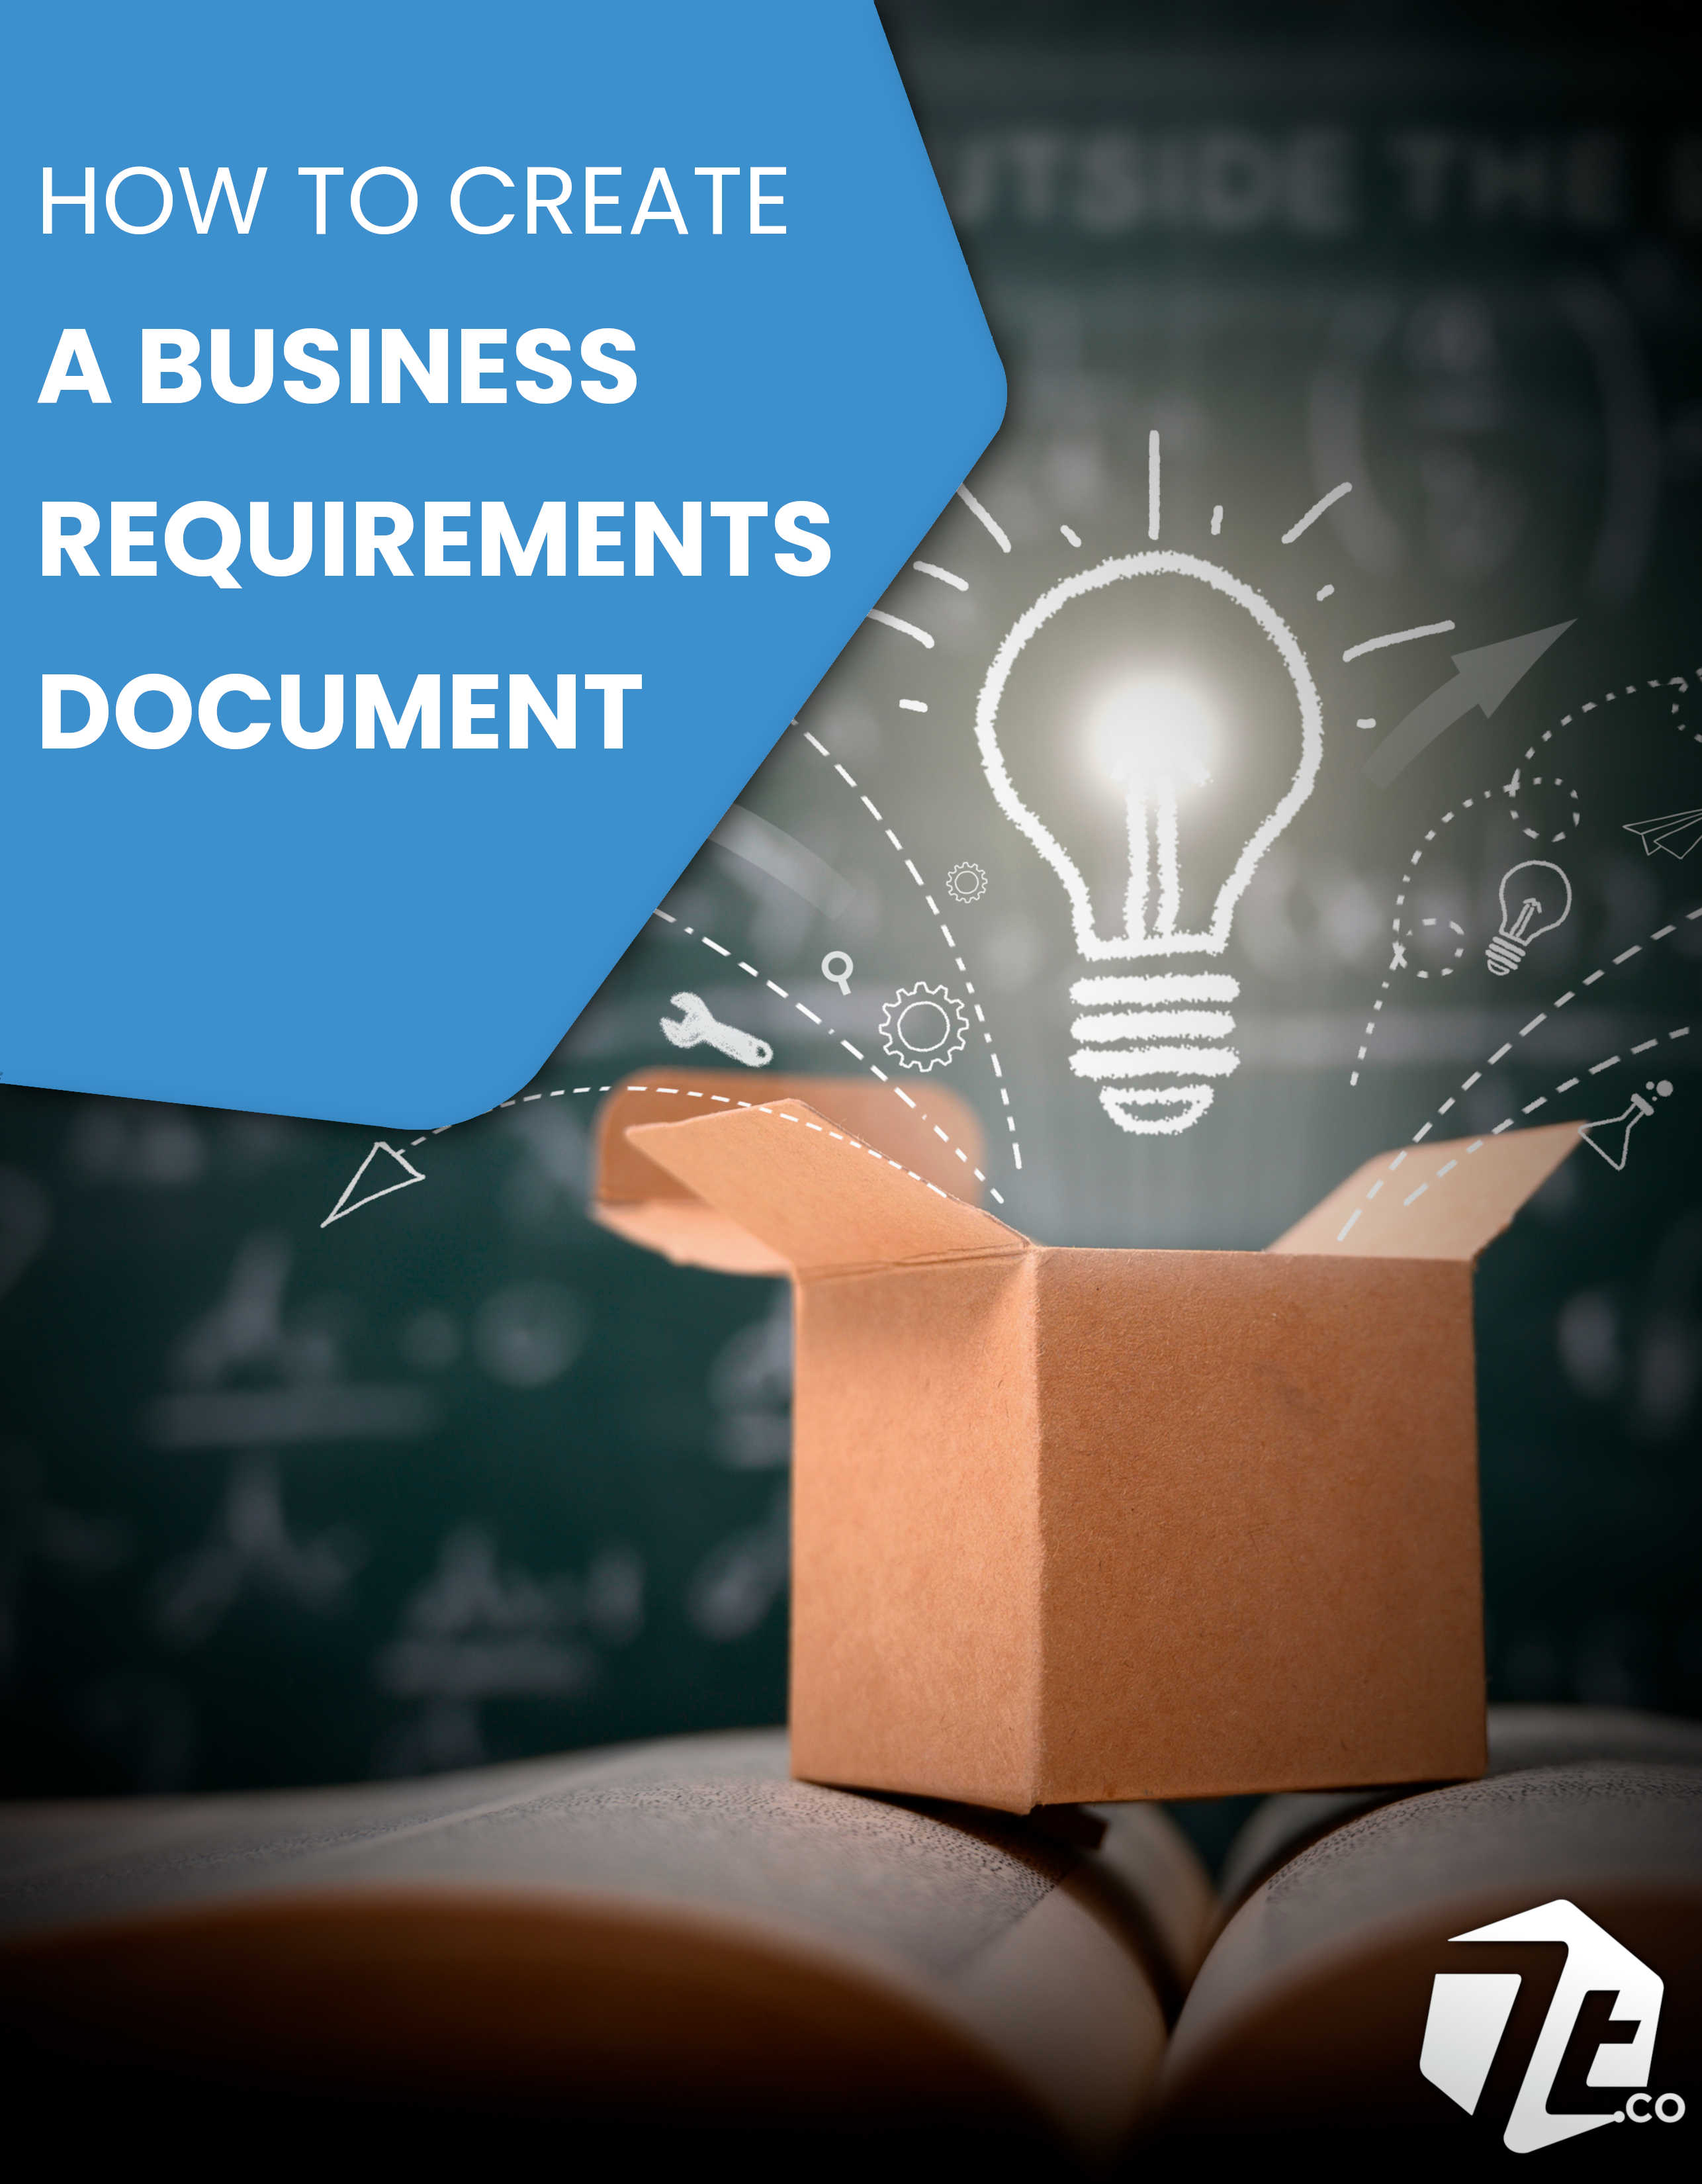 1-Business Requirements Doc-cover